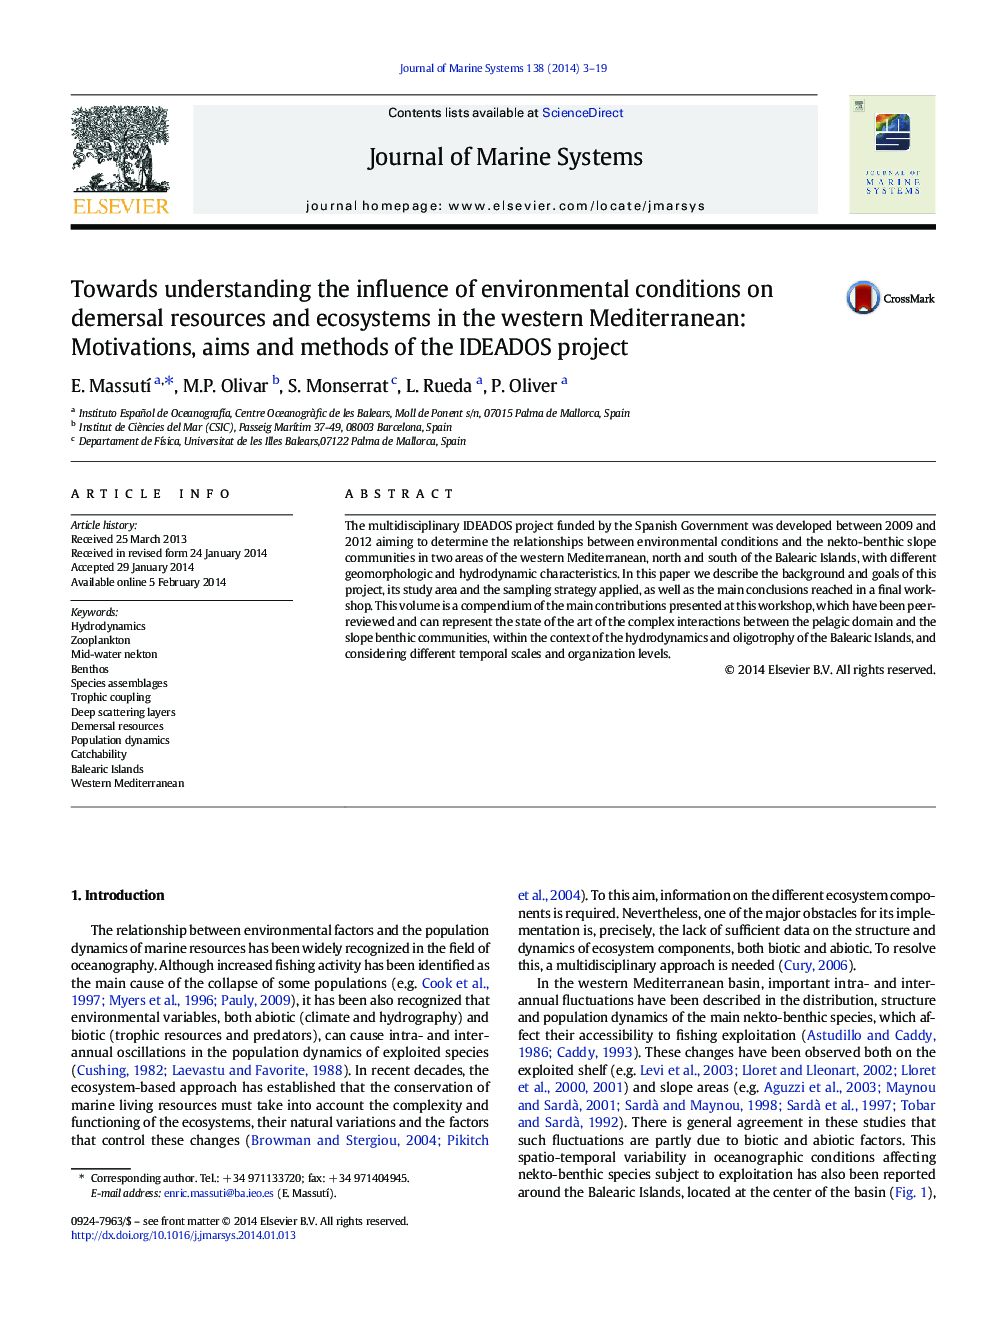 Towards understanding the influence of environmental conditions on demersal resources and ecosystems in the western Mediterranean: Motivations, aims and methods of the IDEADOS project